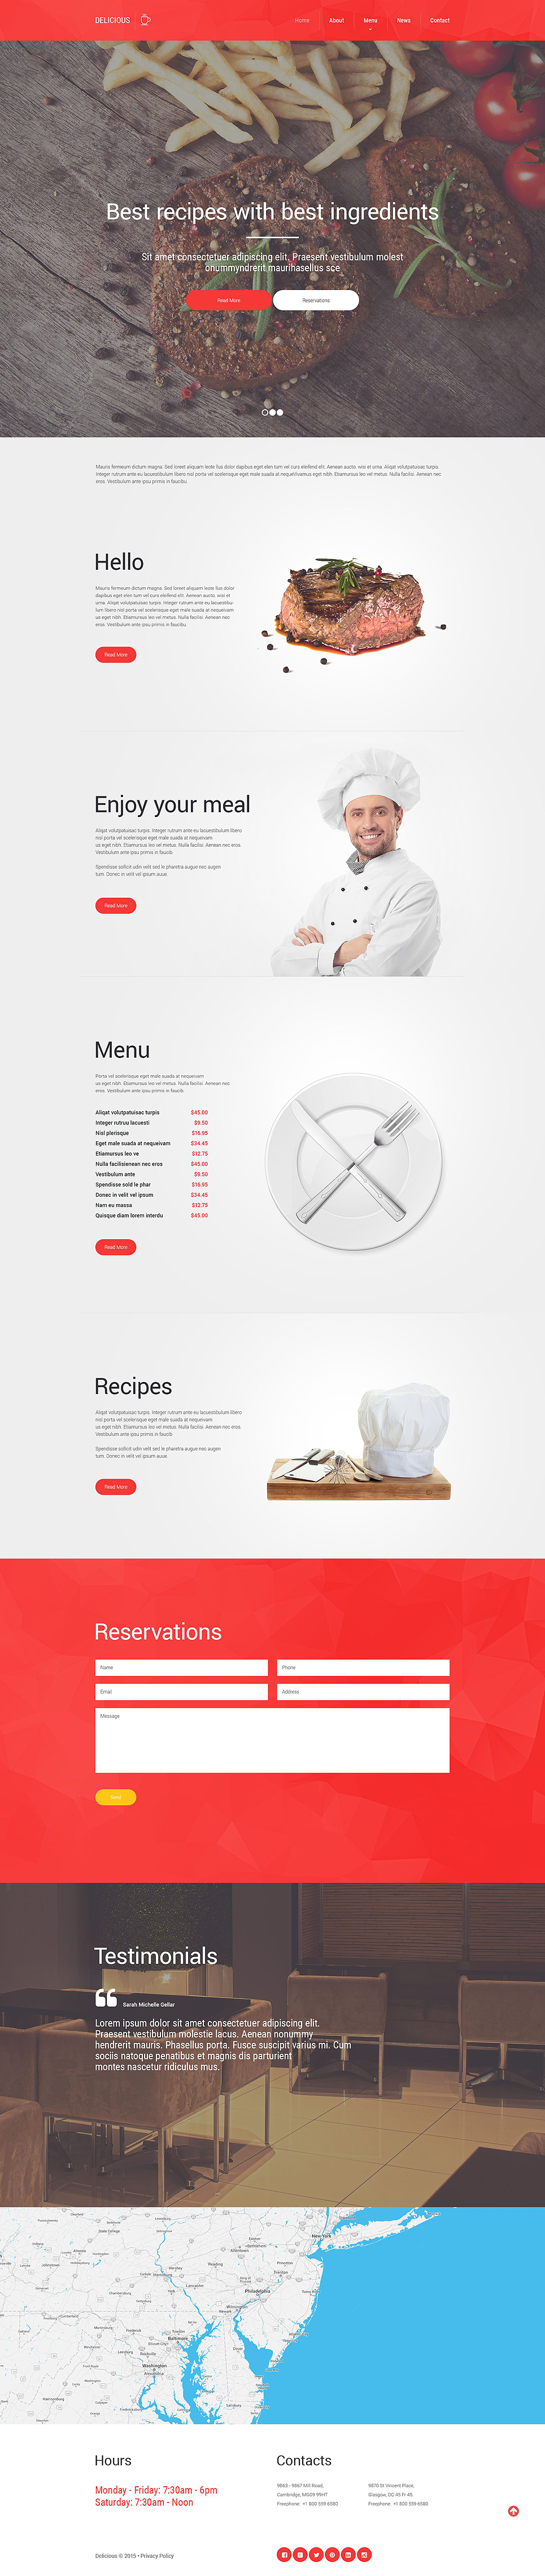 cafe-and-restaurant-responsive-website-template-55001